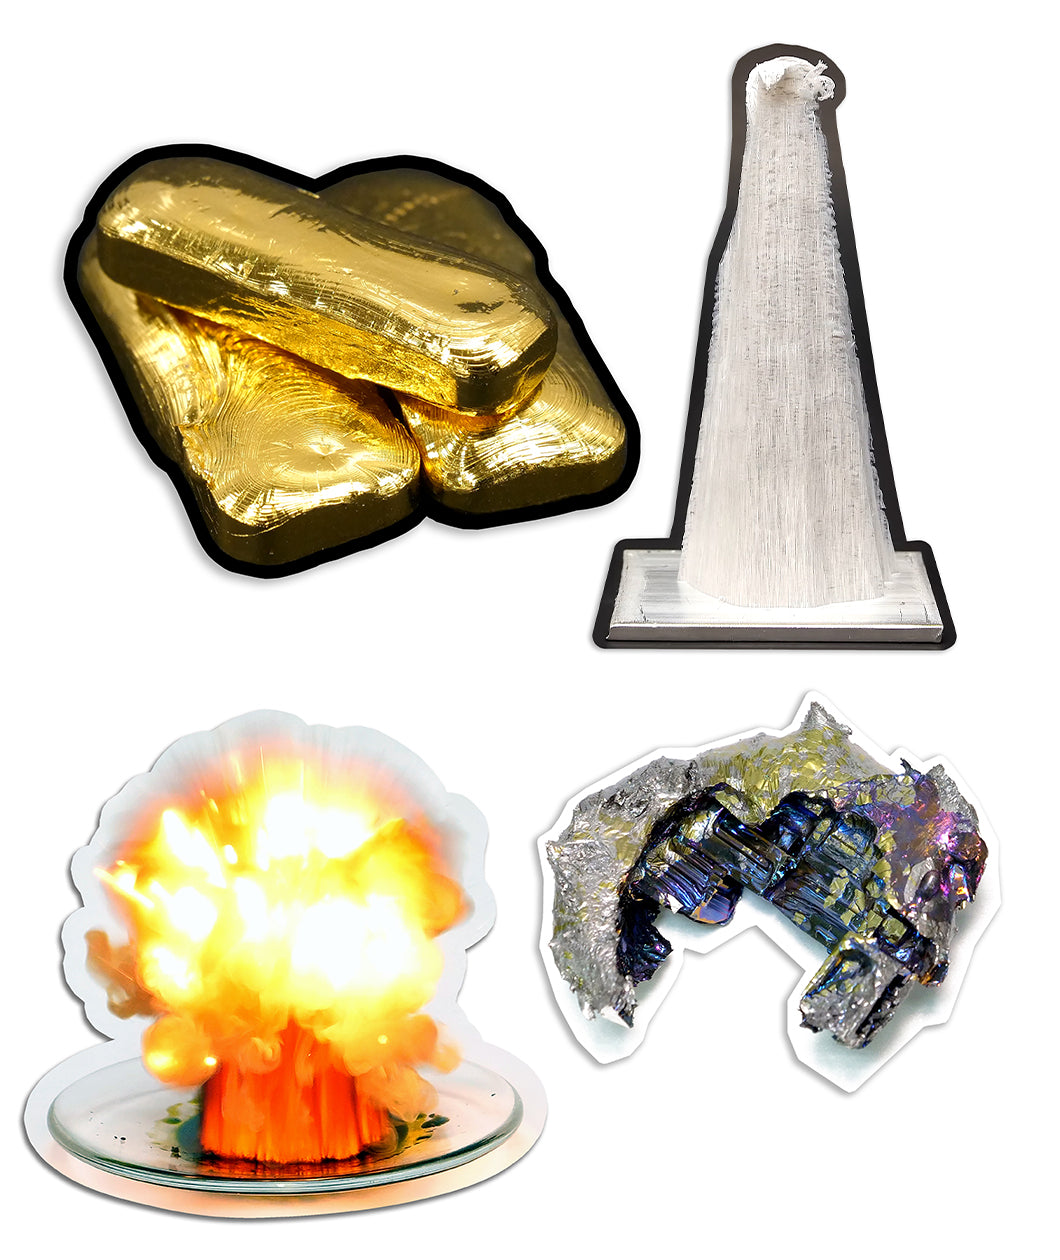 A set of four sticker packs of different minerals. From NileRed.